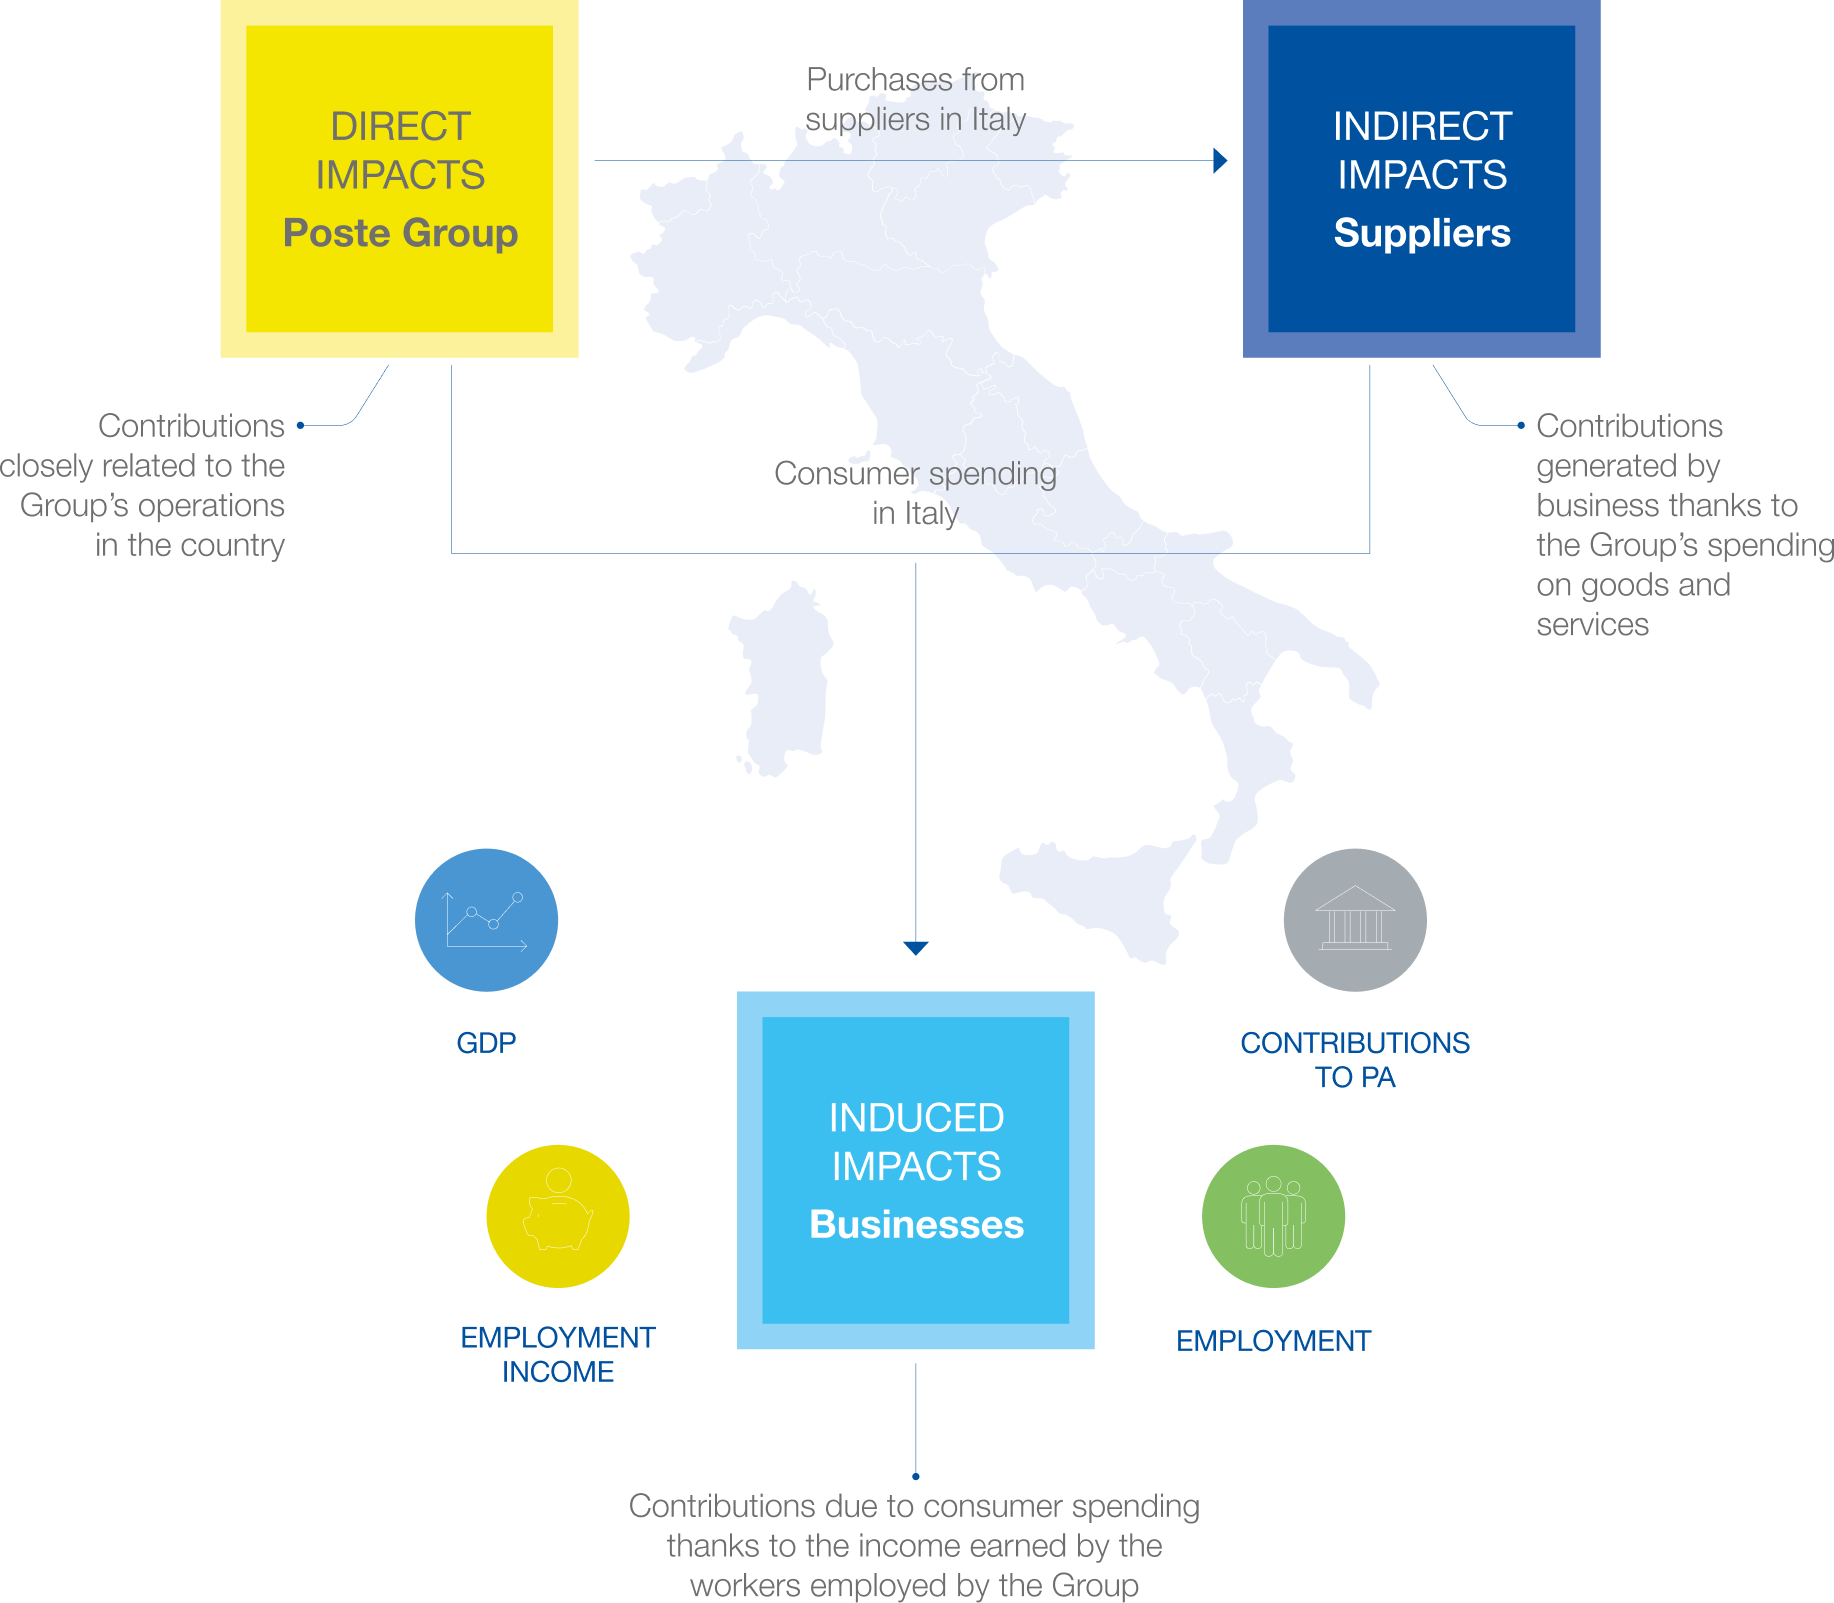 Impacts generated by poste italiane